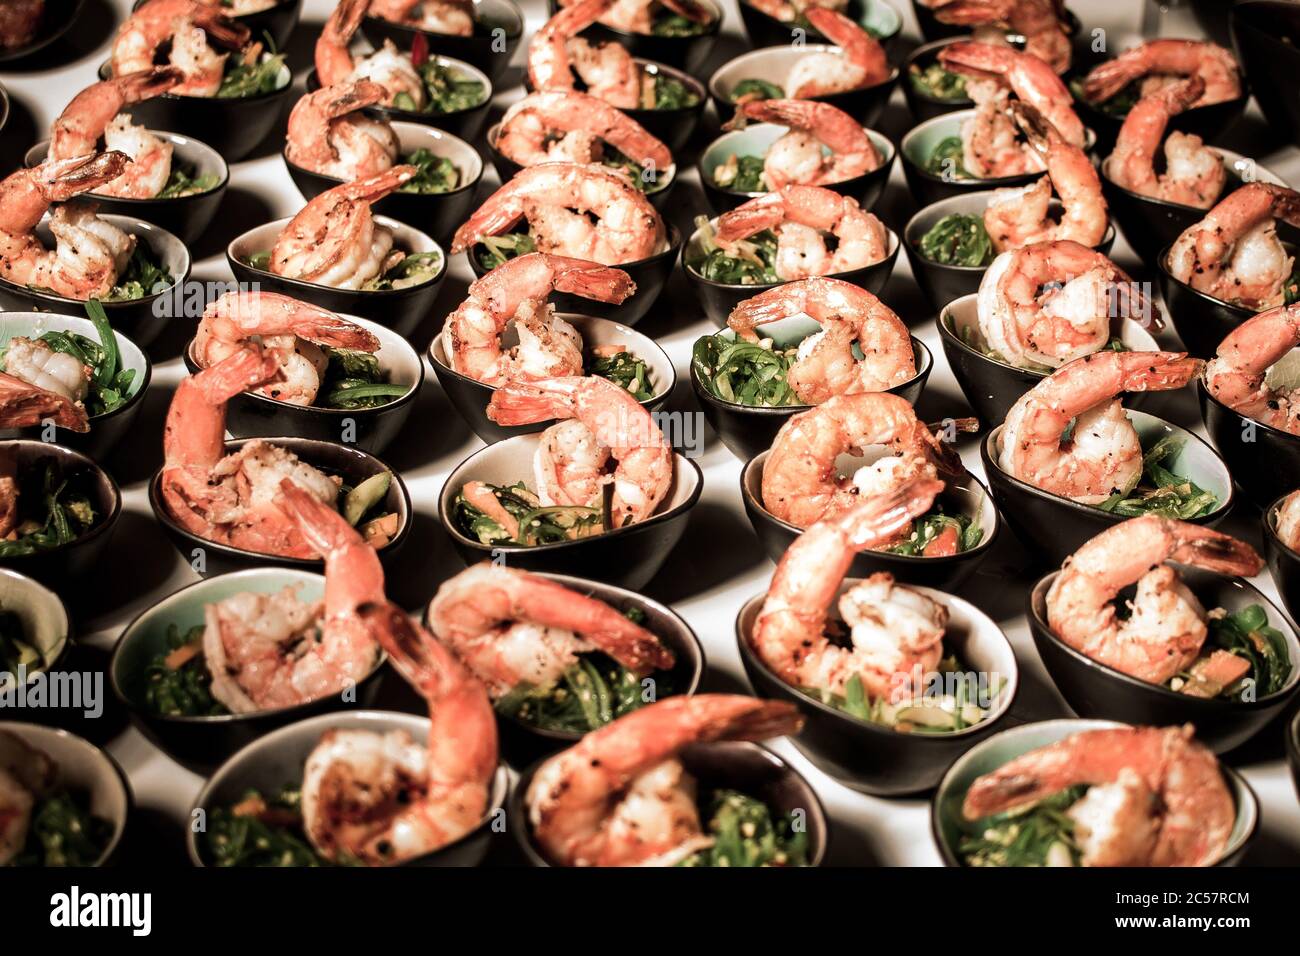 shrimps catering service seafood buffet wedding food Stock Photo